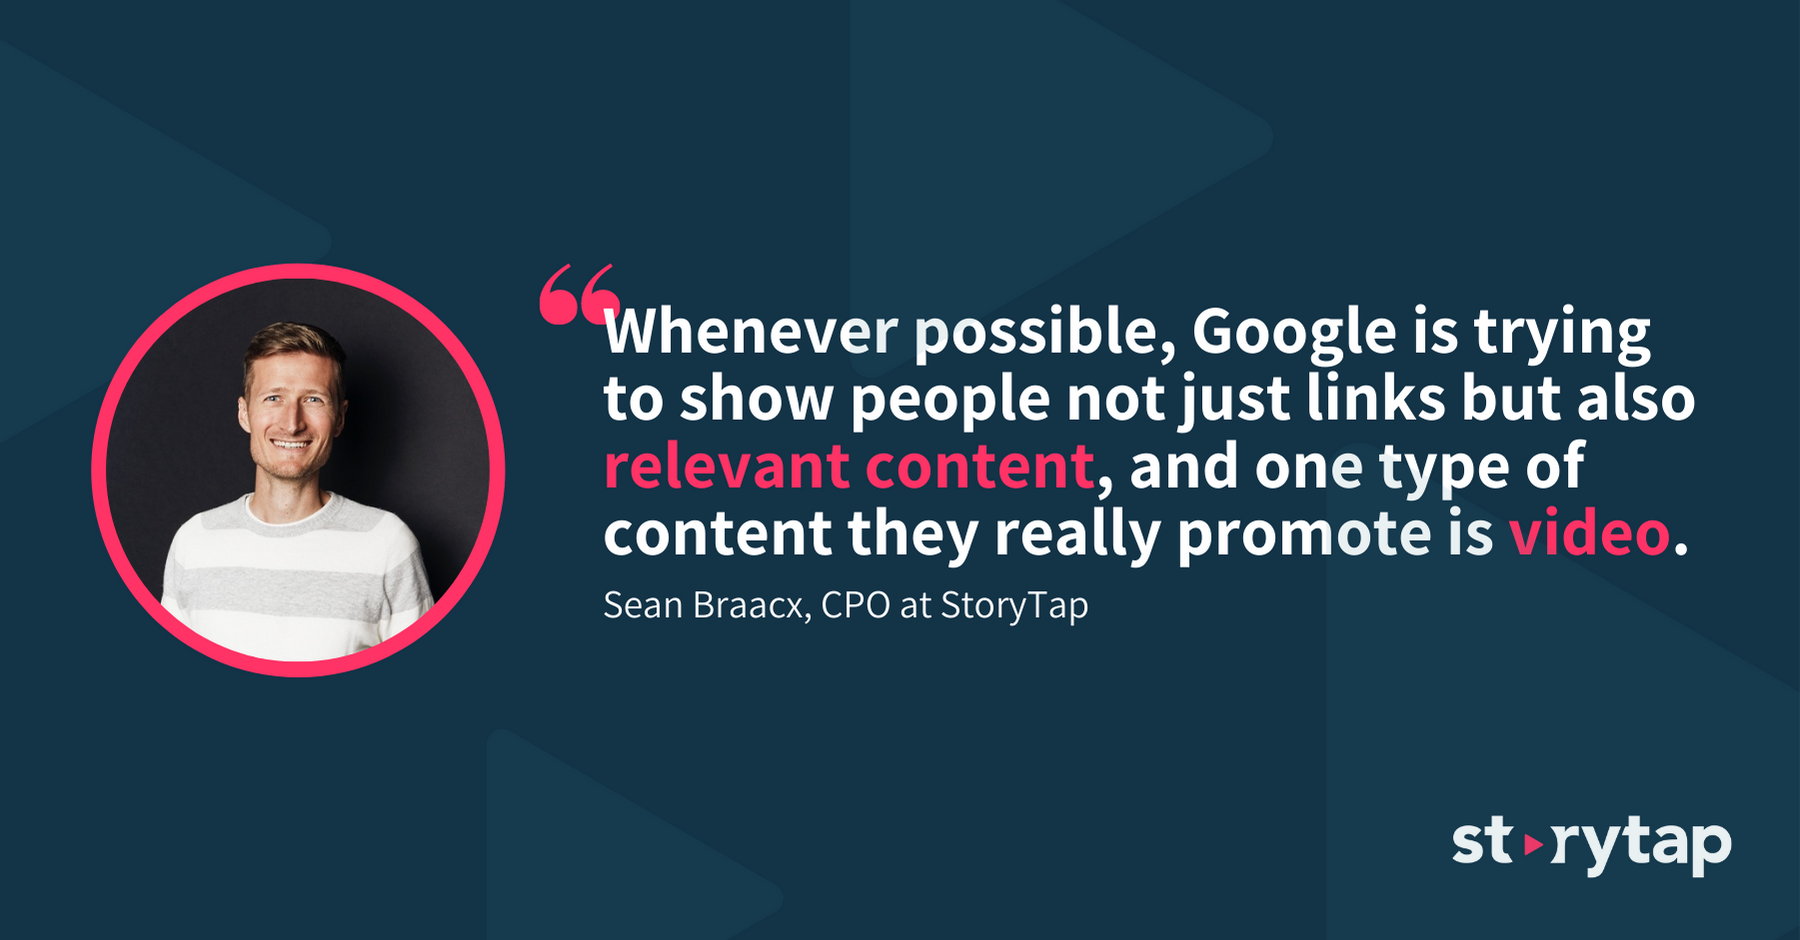 "Whenever possible, Google is trying to show people not just links but also relevant content, and one type of content they really promot is video" - Sean Braacx, CPO at StoryTap